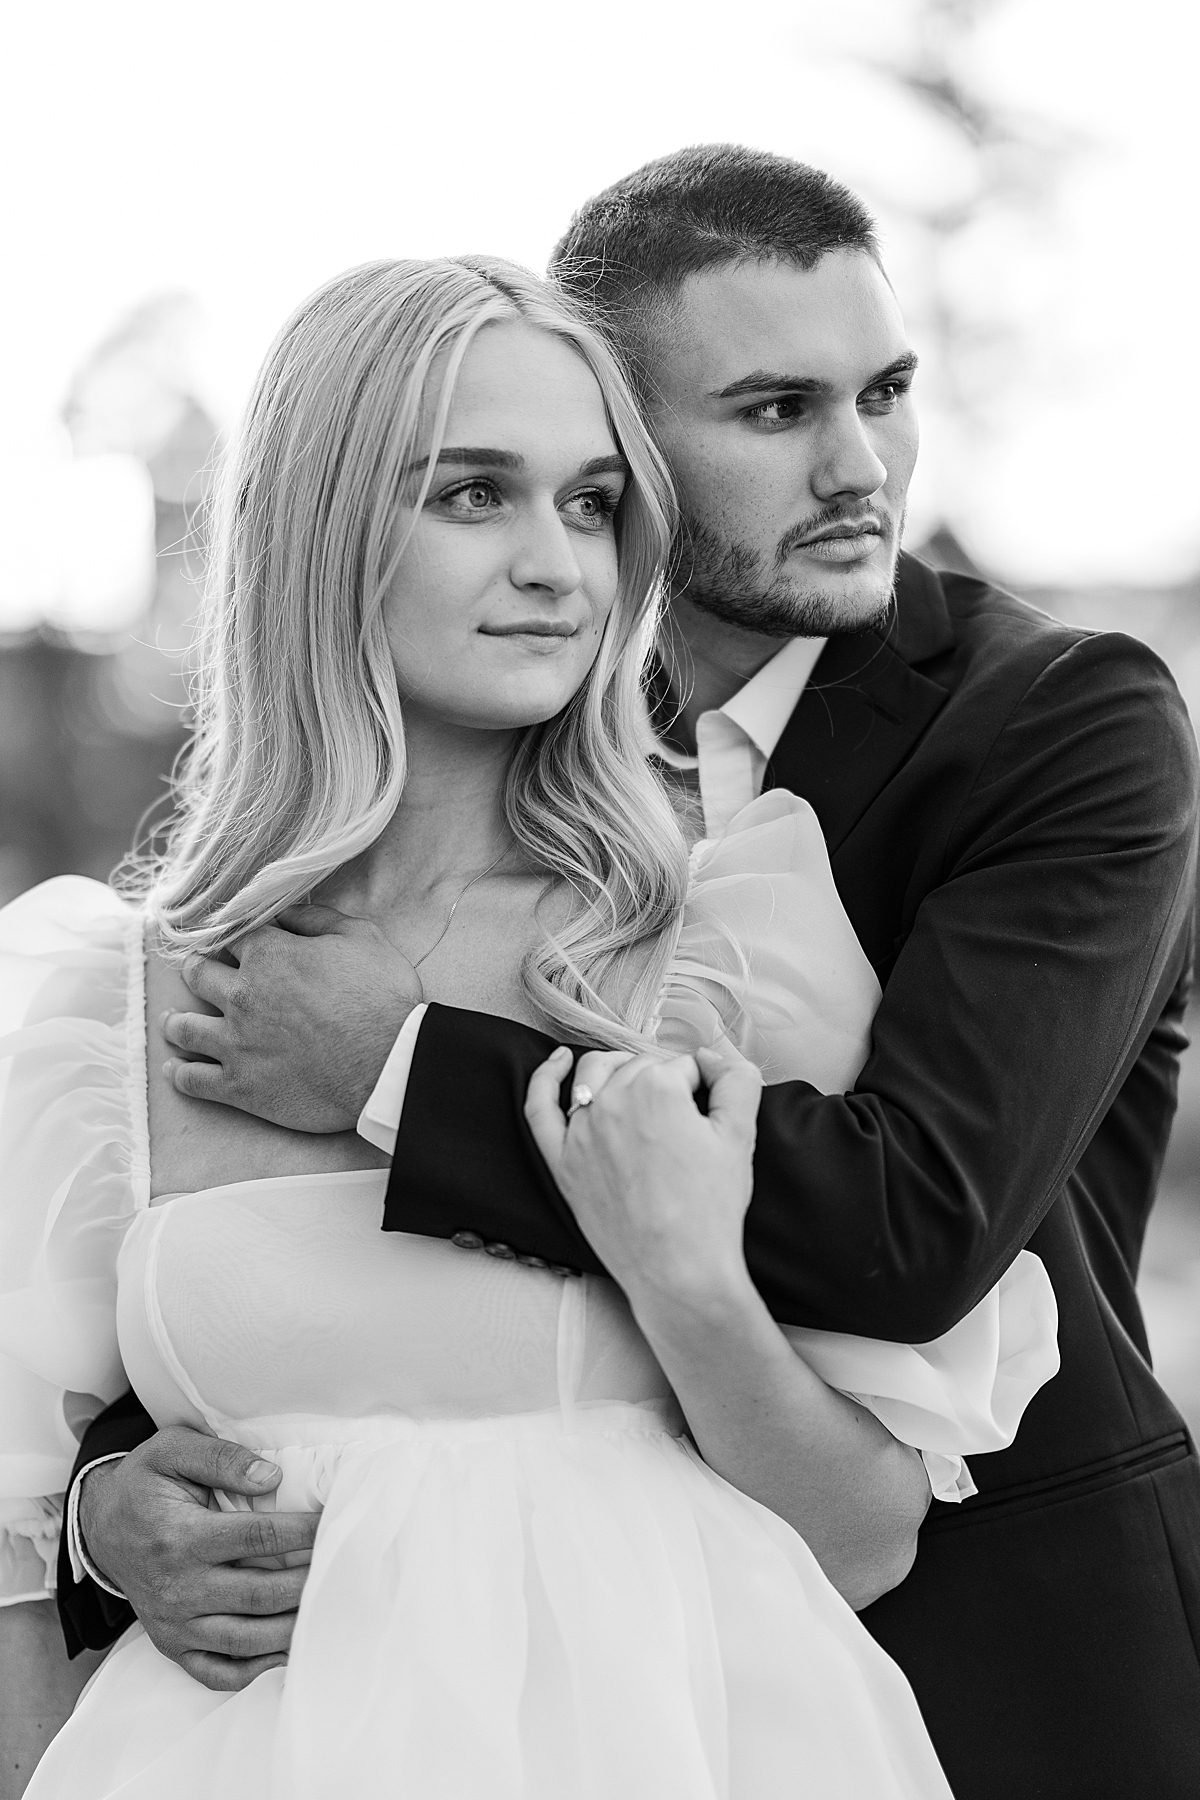 A dramatic black and white image of a model couple.